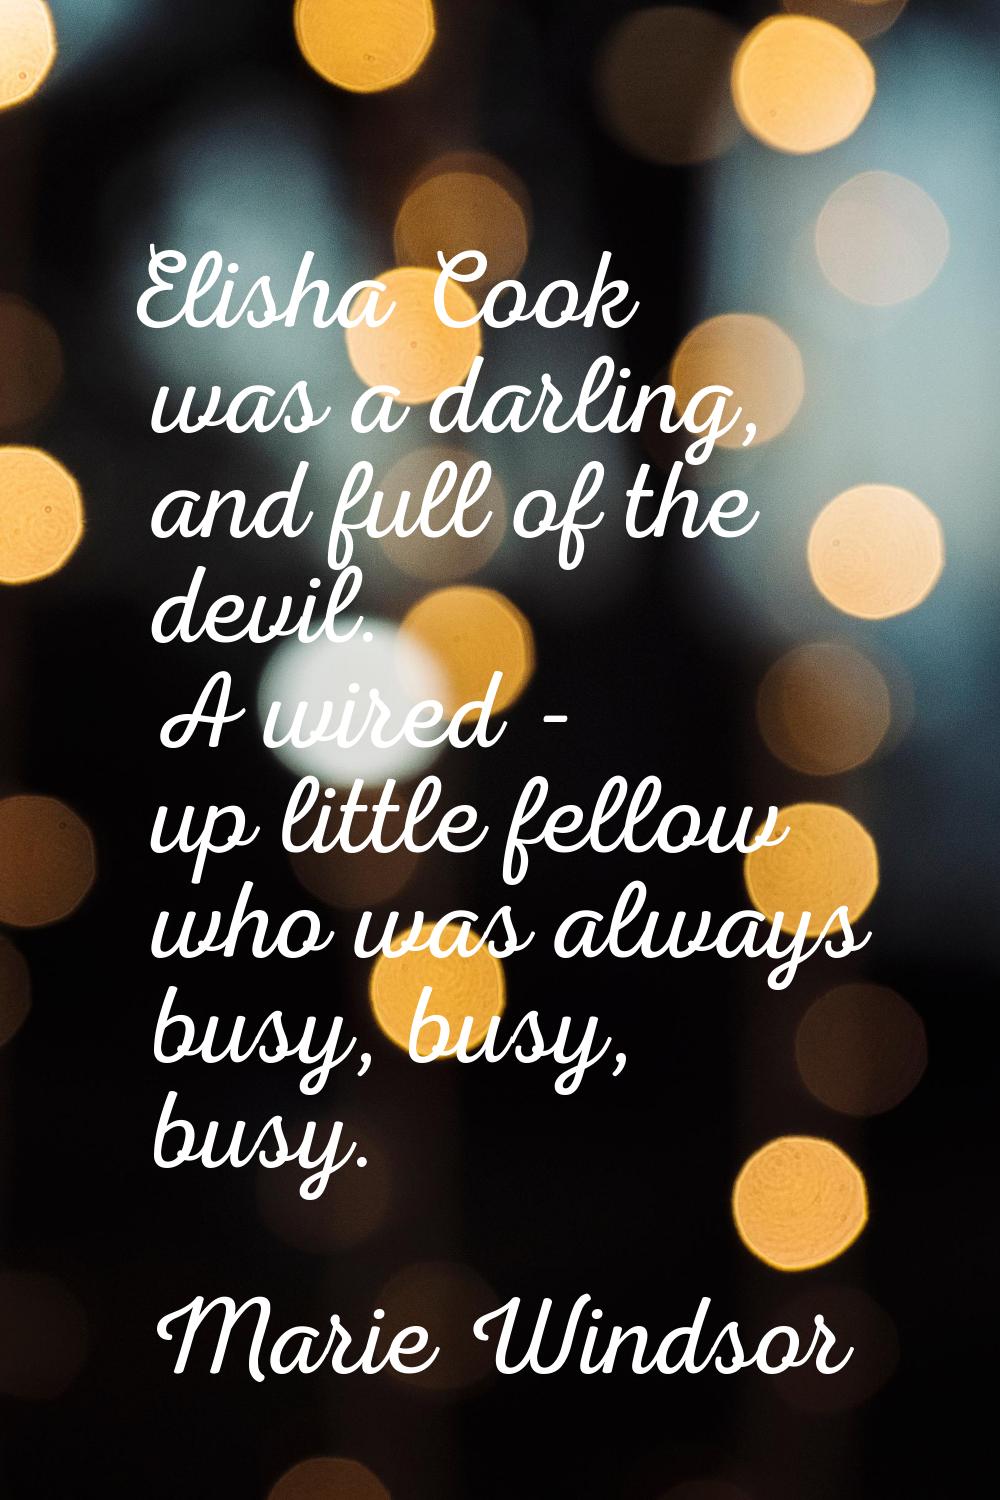 Elisha Cook was a darling, and full of the devil. A wired - up little fellow who was always busy, b